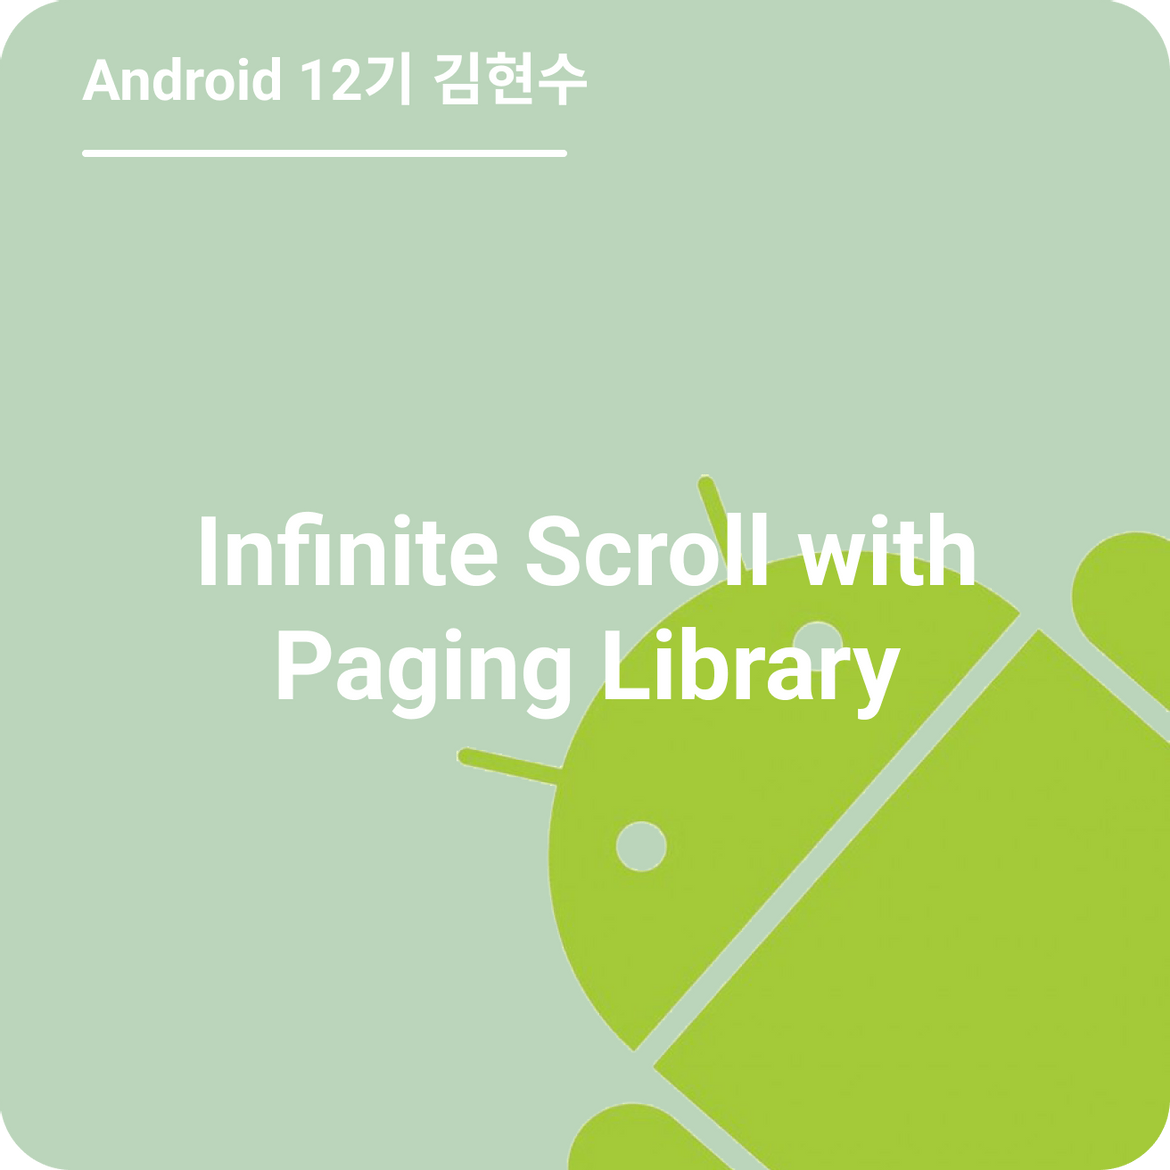 Infinite Scroll with Paging Library